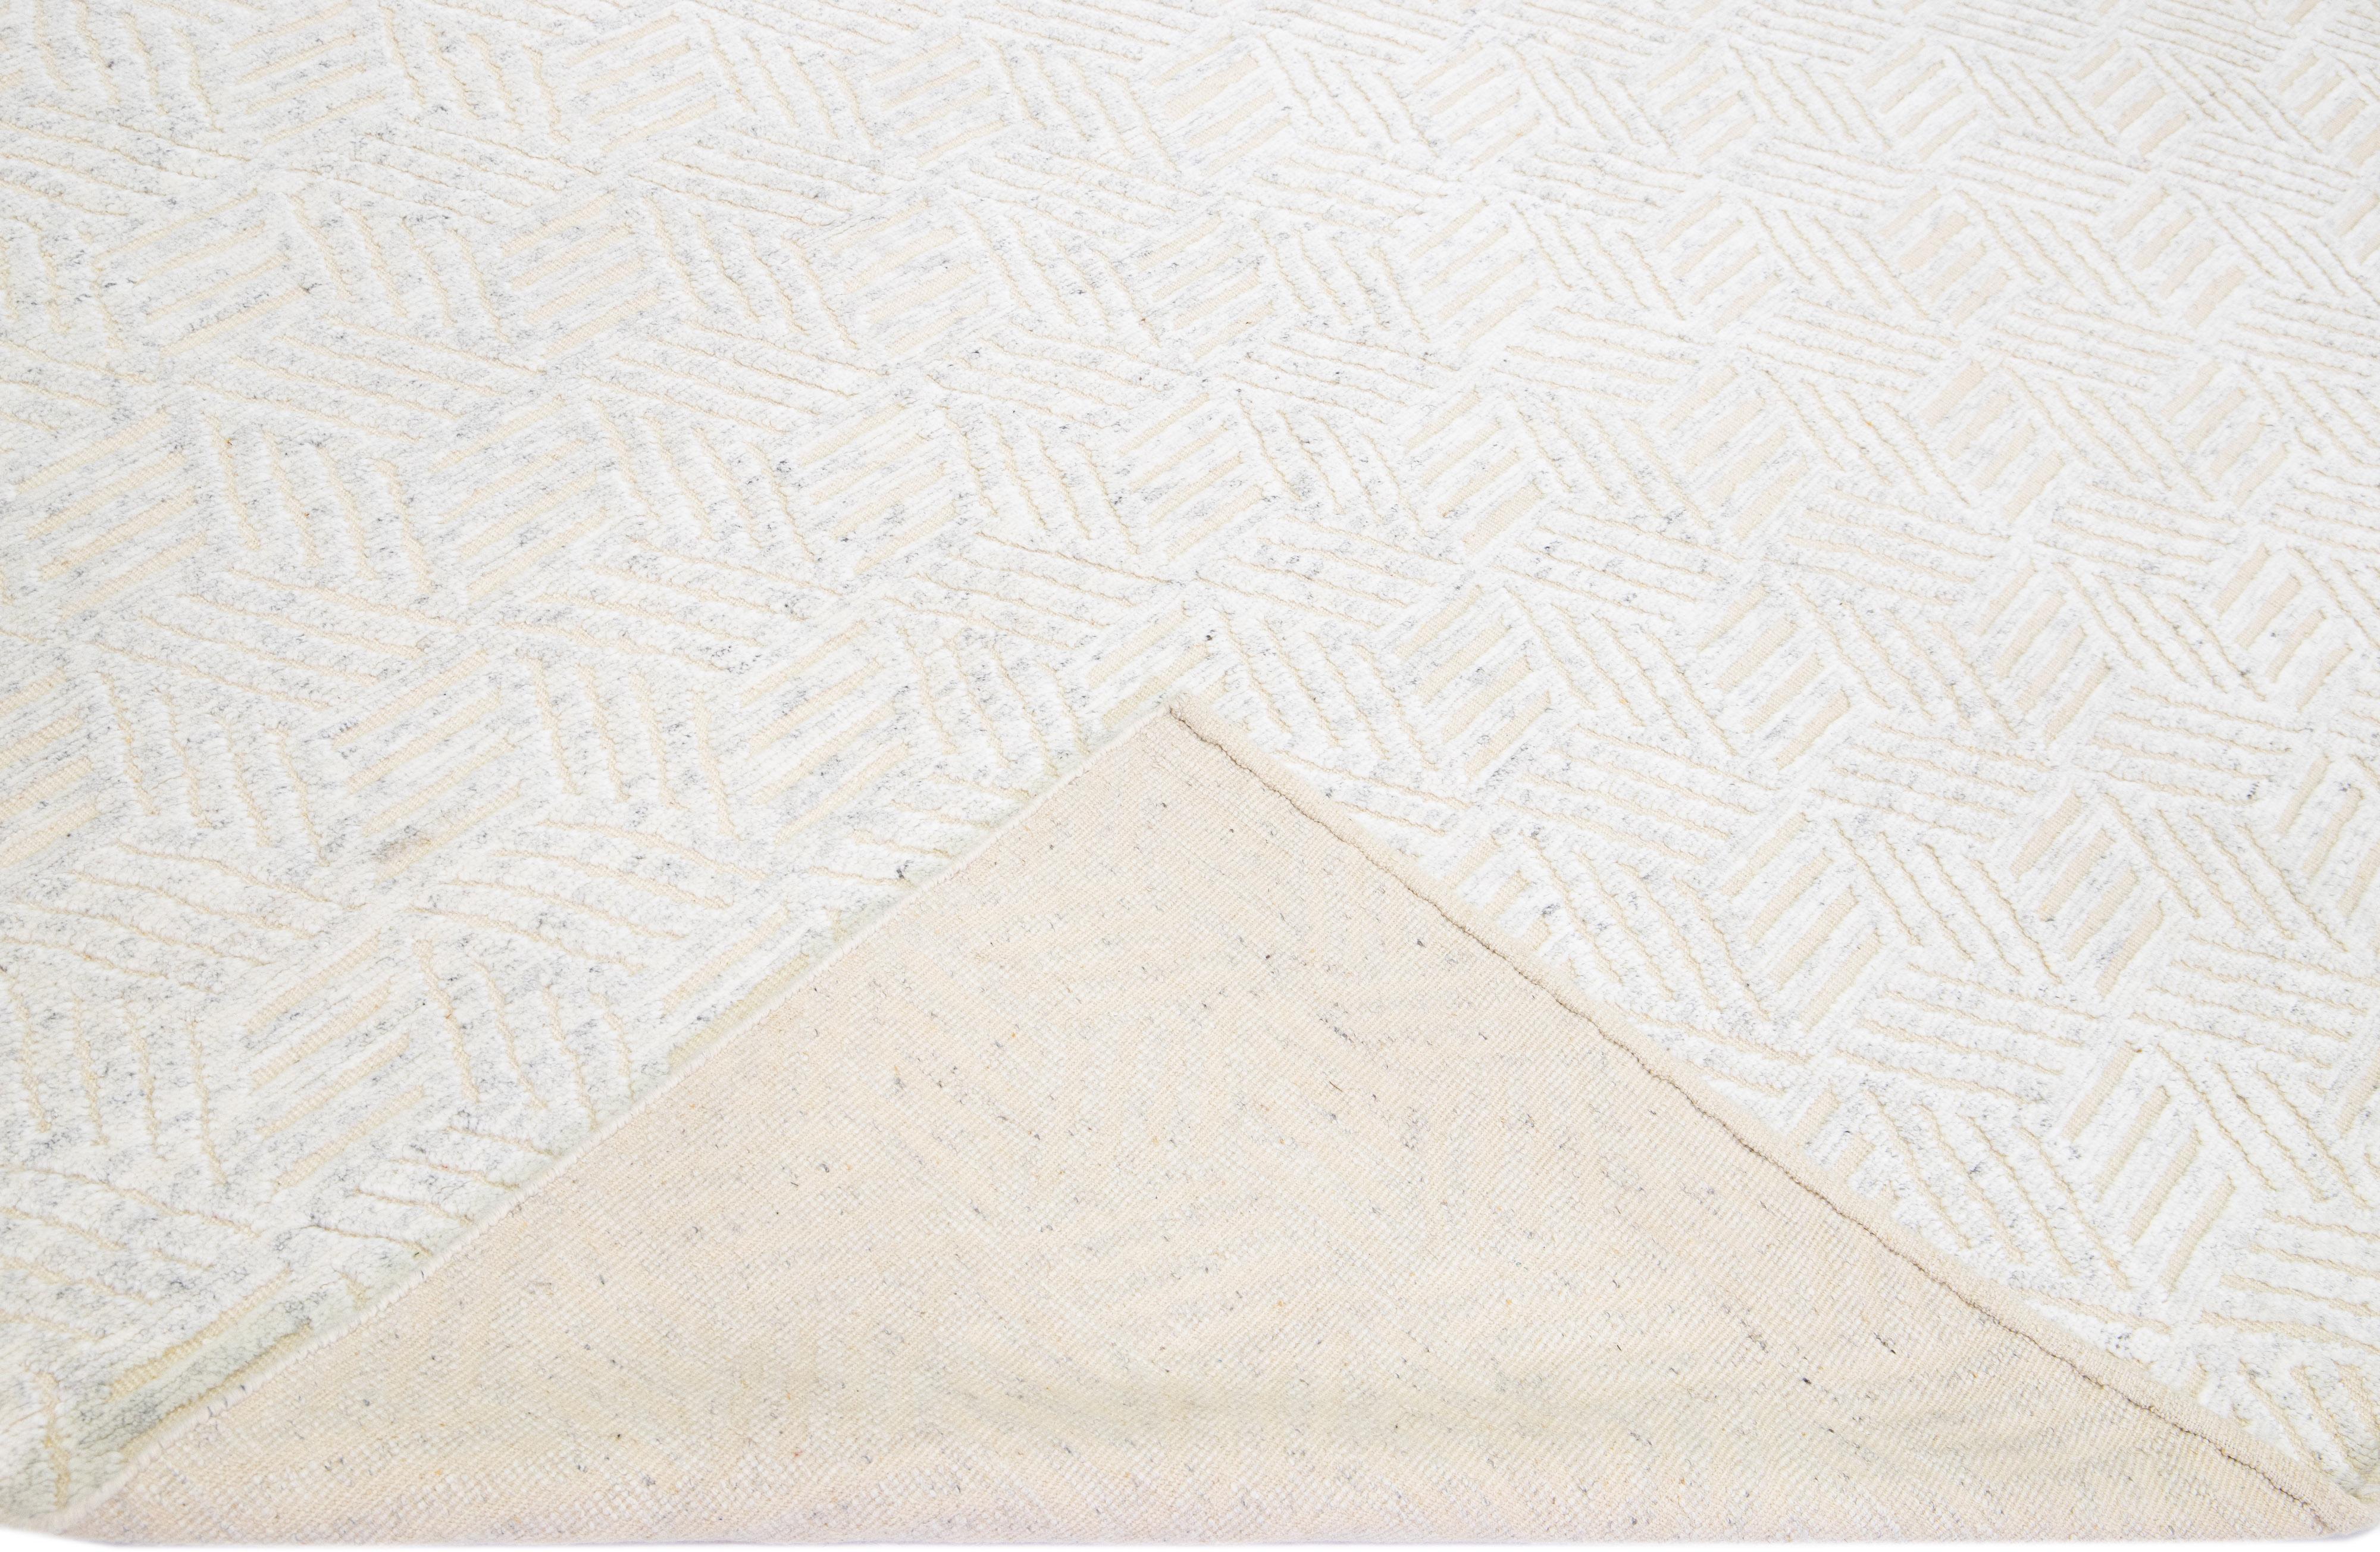 Beautiful modern Moroccan style hand-knotted wool rug with a beige field. This piece has ivory accents with a geometric abstract high pile design.

This rug measures: 10'2'' x 13'11''

Our rugs are professional cleaning before shipping.